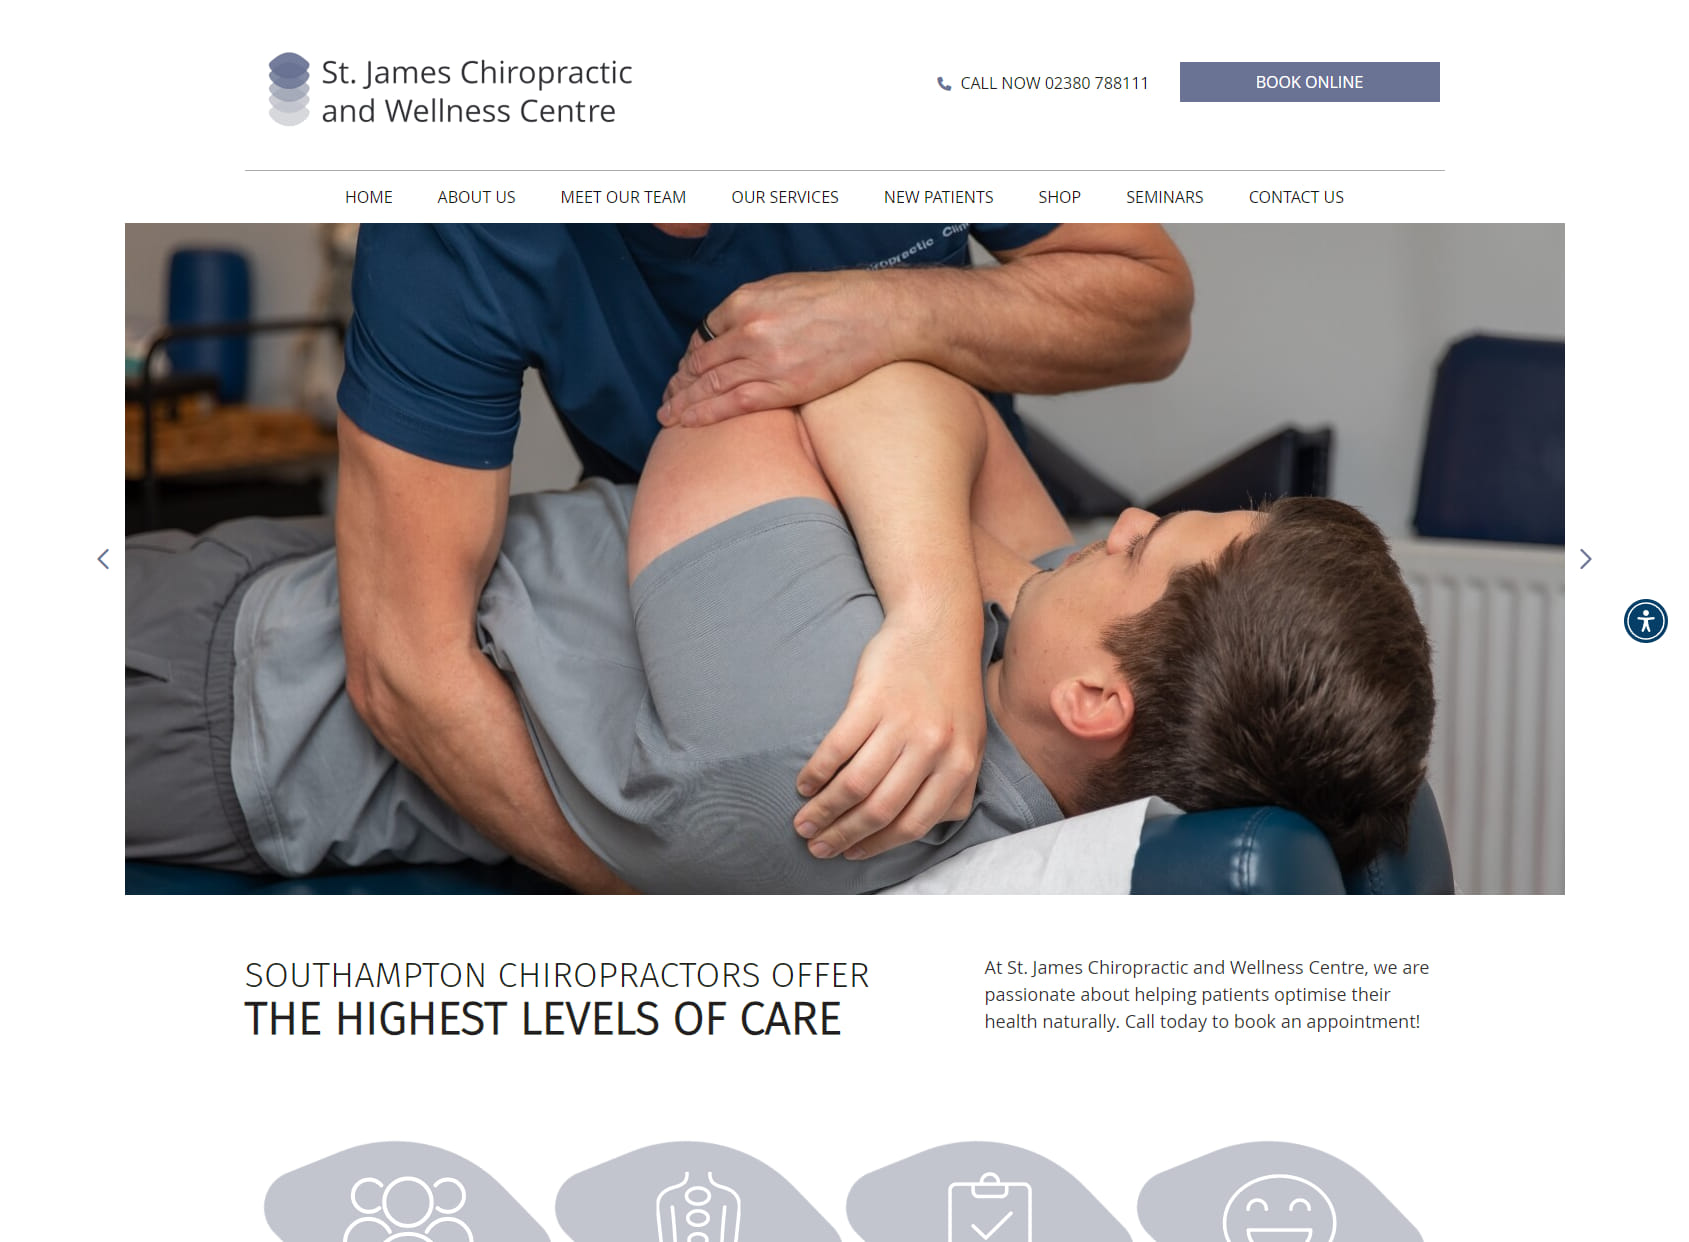 St. James Chiropractic and Wellness Centre